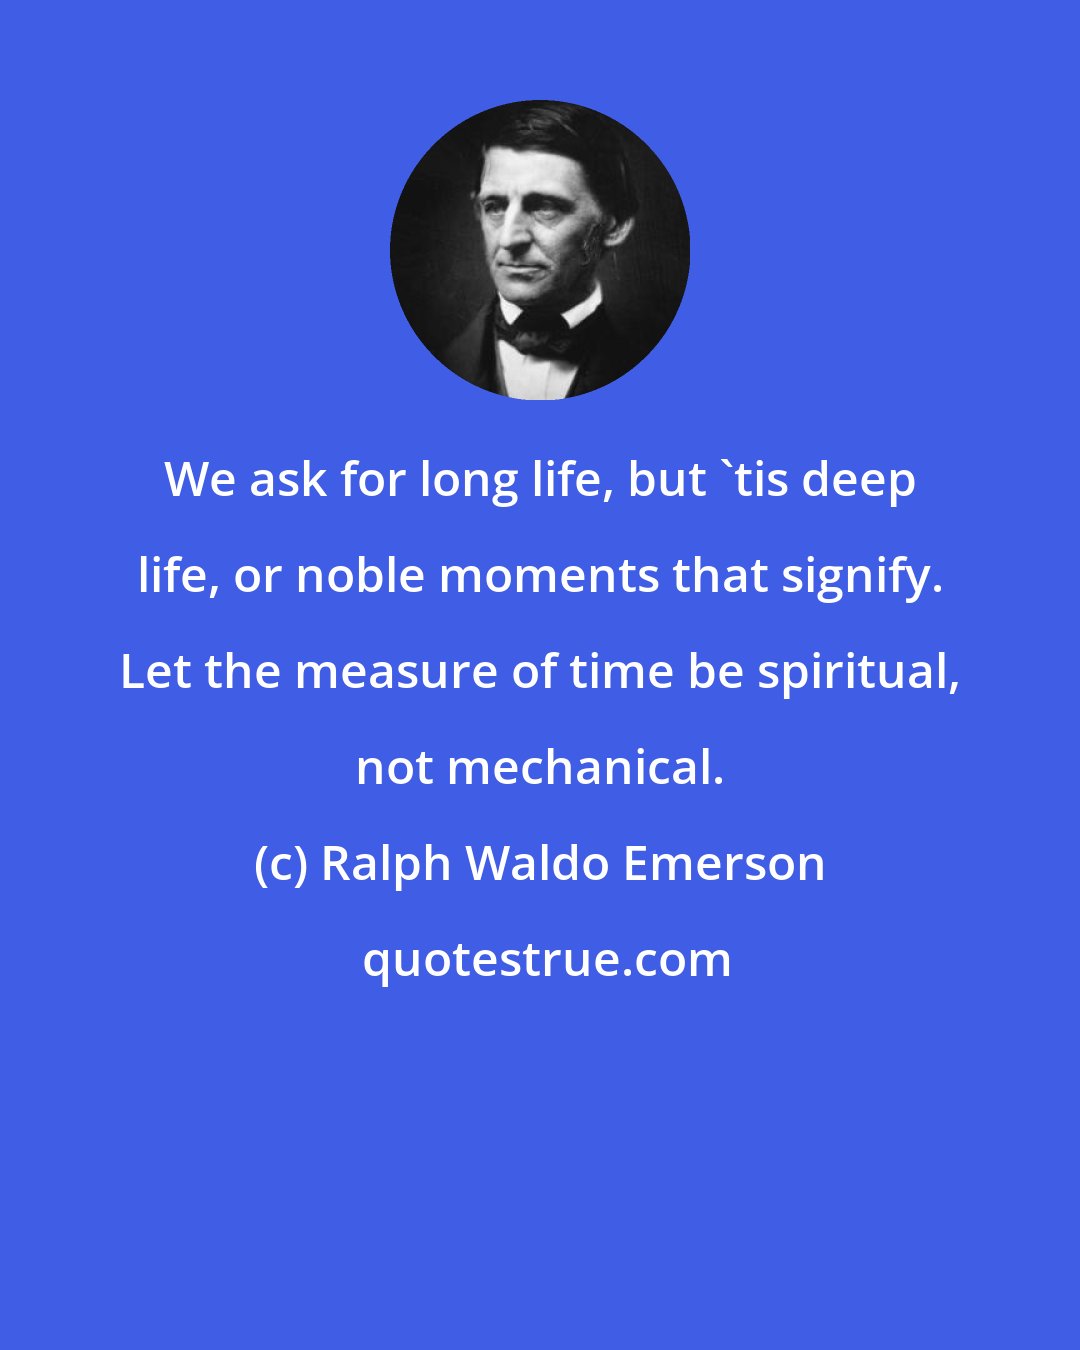 Ralph Waldo Emerson: We ask for long life, but 'tis deep life, or noble moments that signify. Let the measure of time be spiritual, not mechanical.